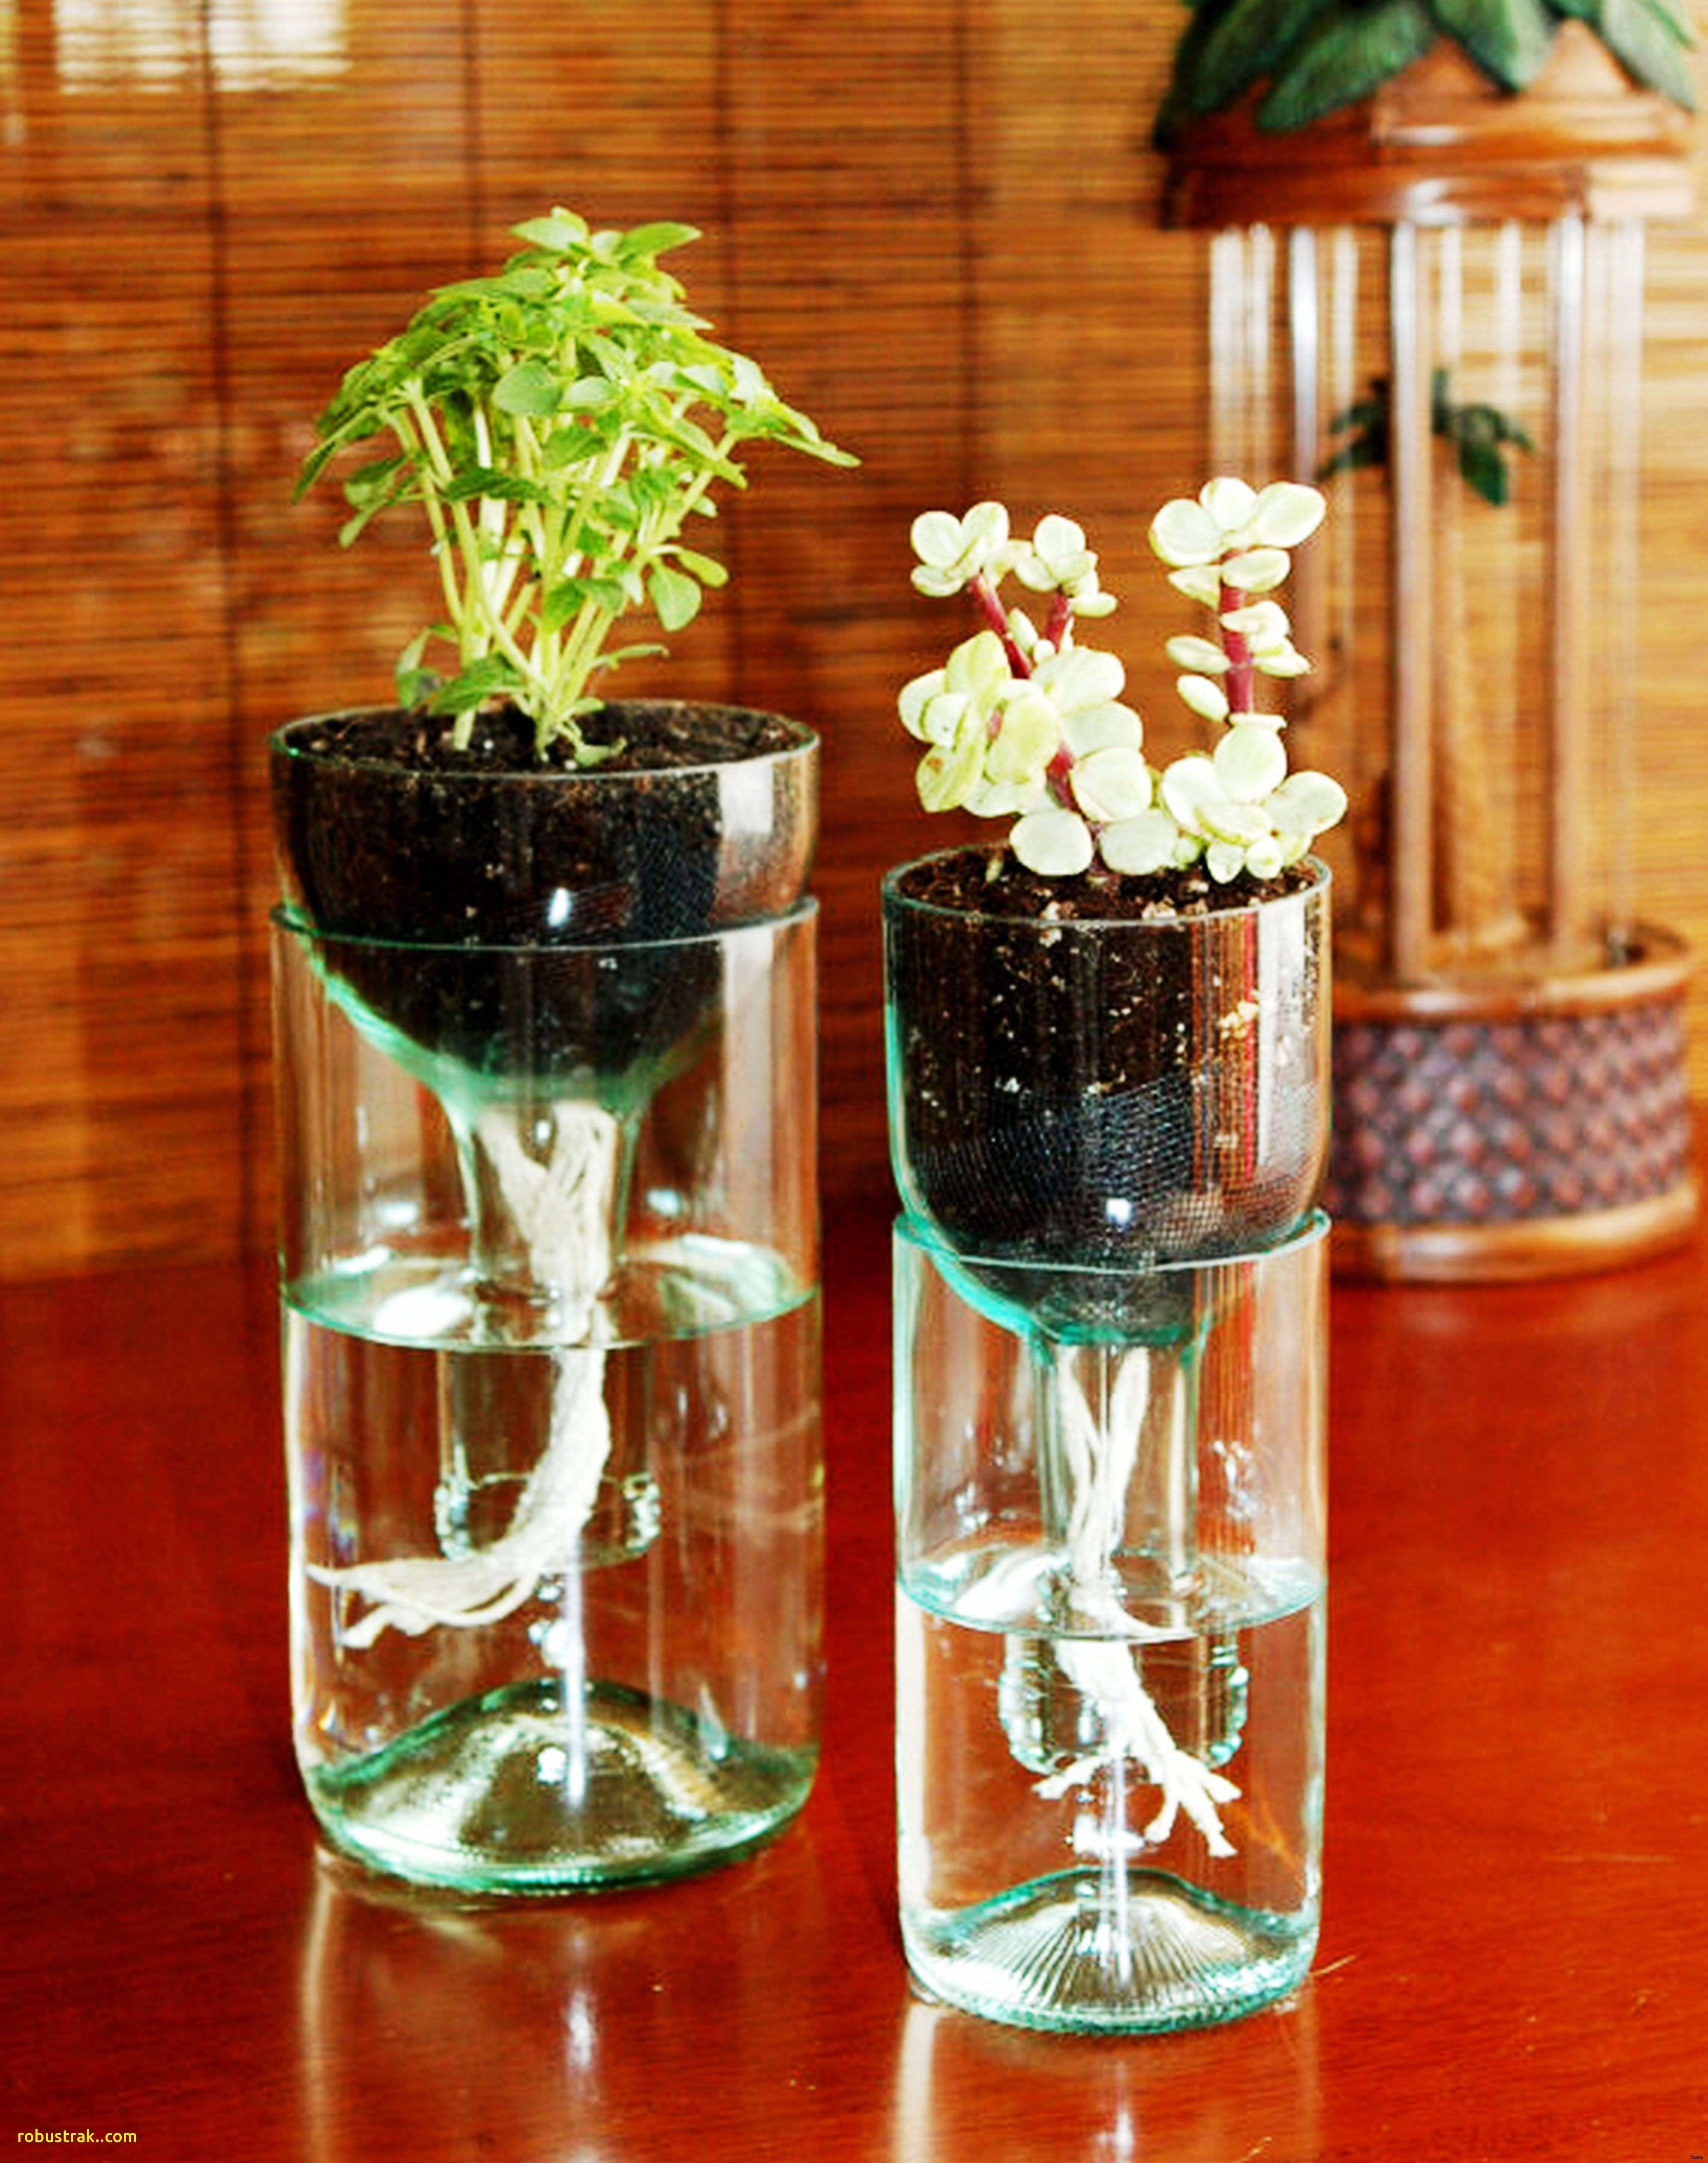 18 Fashionable Square Glass Vases Cheap 2023 free download square glass vases cheap of unique glass bowl centerpiece decorating ideas home design ideas pertaining to stunning flower vase decoration home diy interior ideas with homeh vases homei 0d v